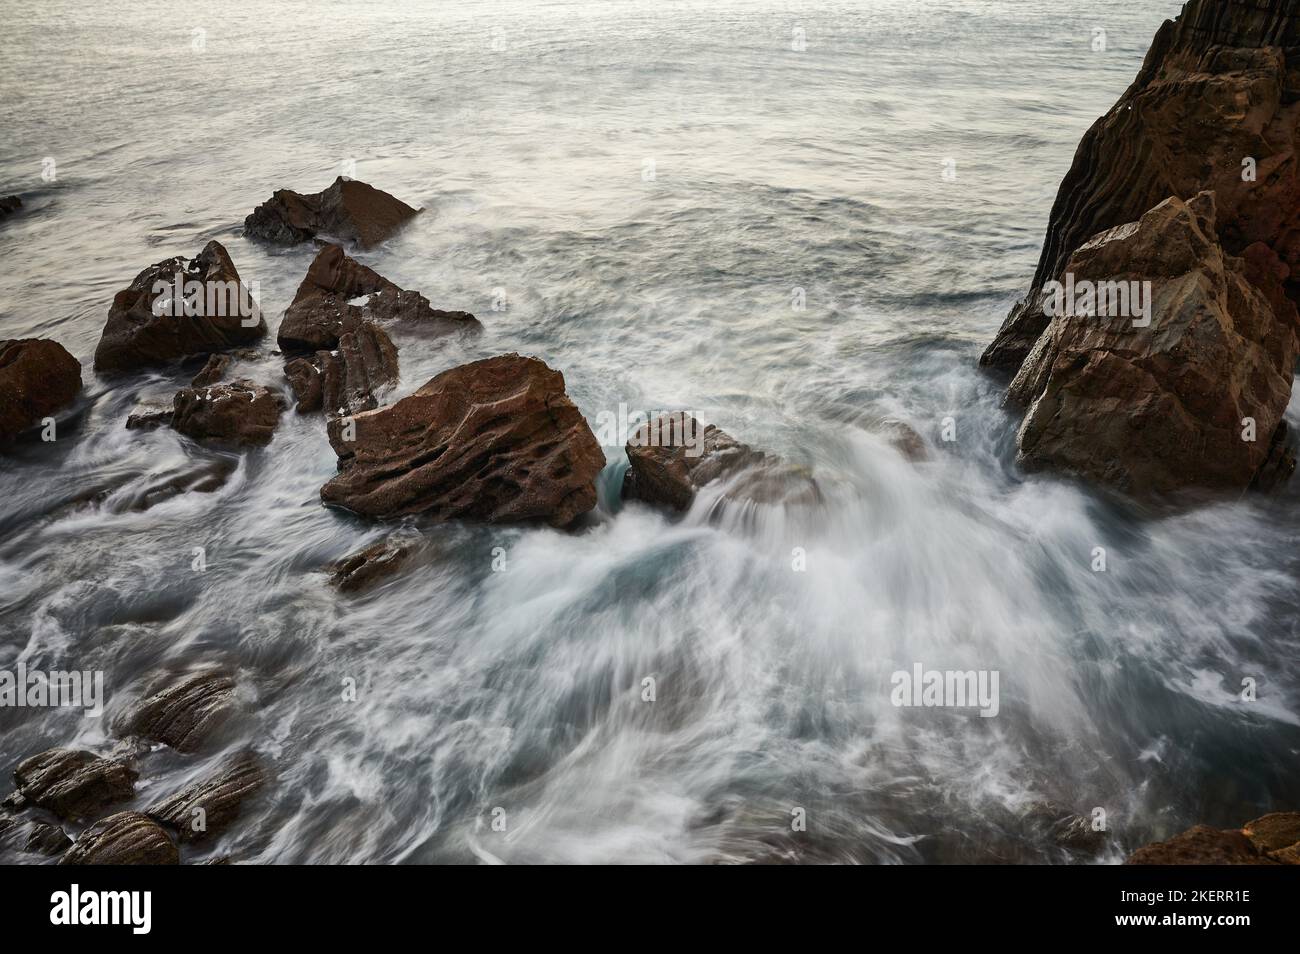 Waves breaking on the rocks with long exposure image Stock Photo